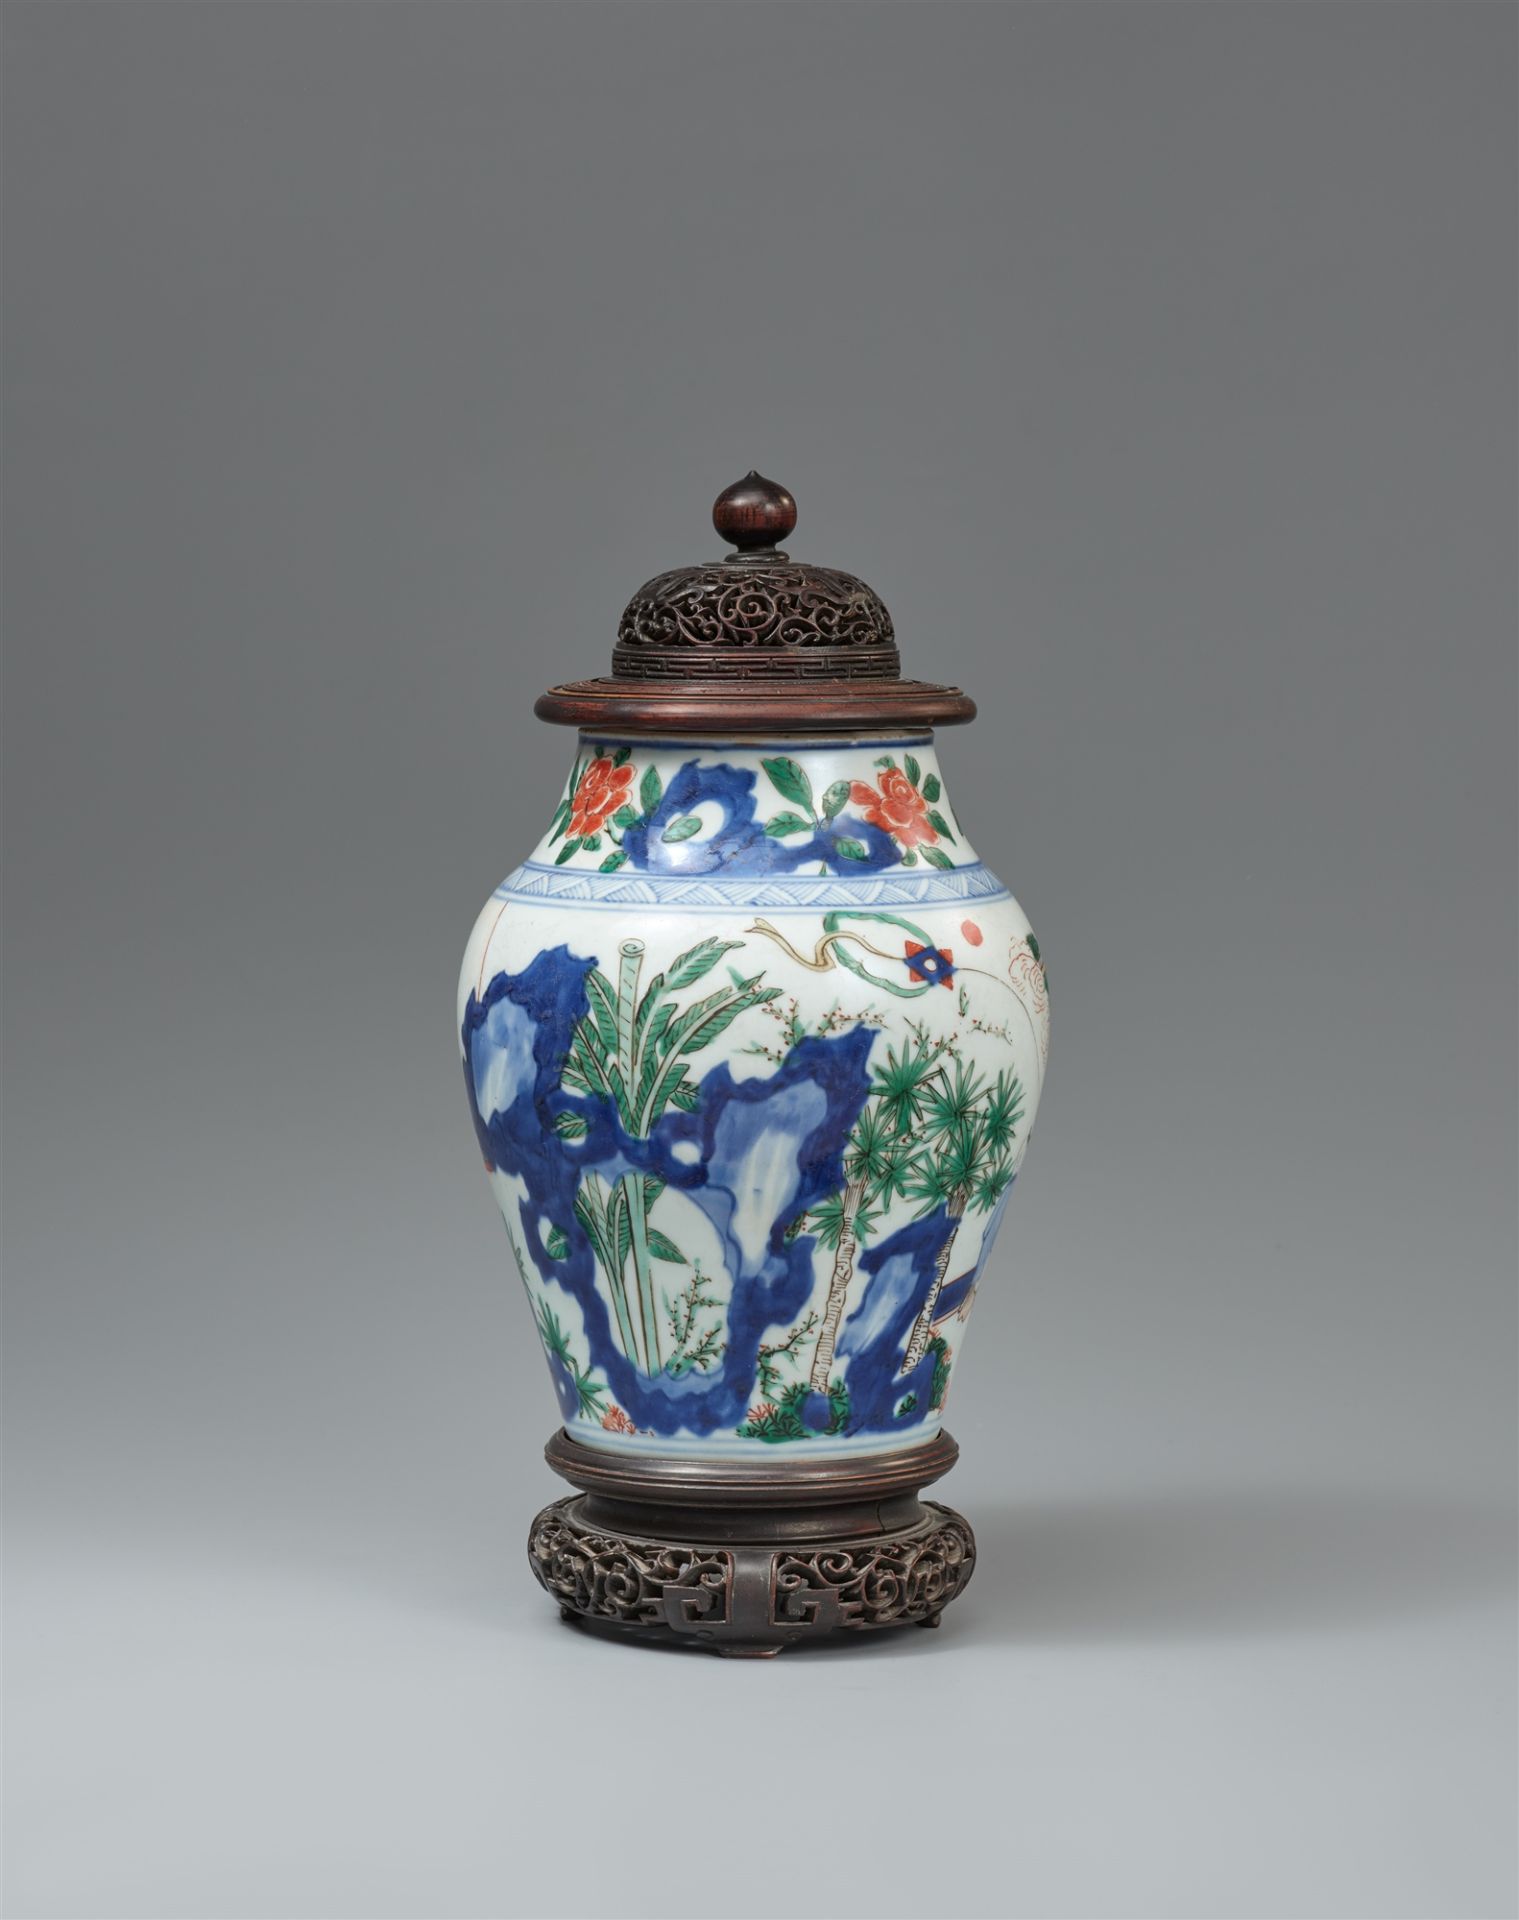 A wucai baluster jar. Transitional period, 17th century - Image 2 of 3